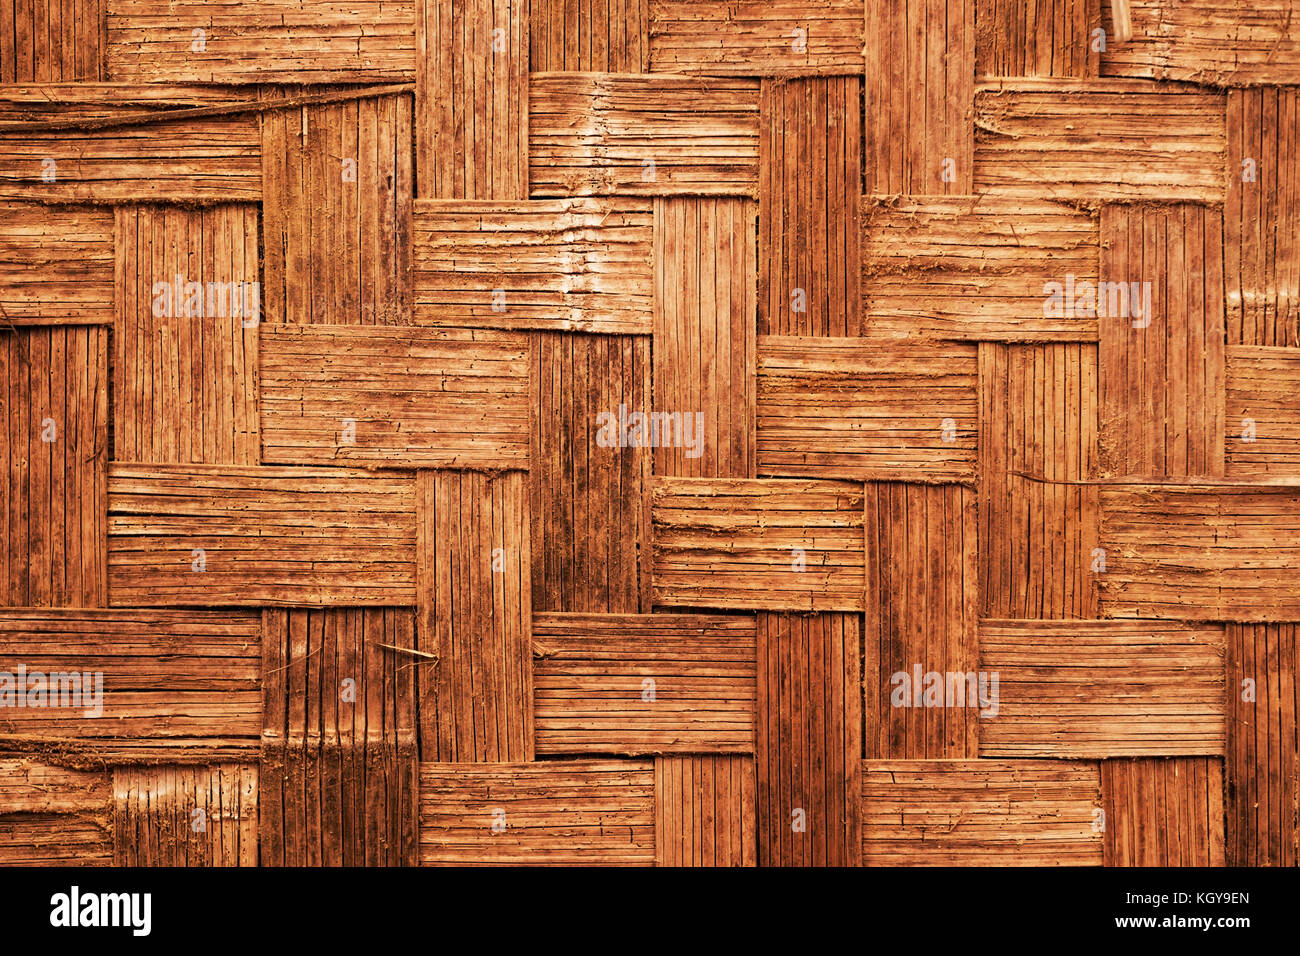 braided wooden panel from natural material. Stock Photo